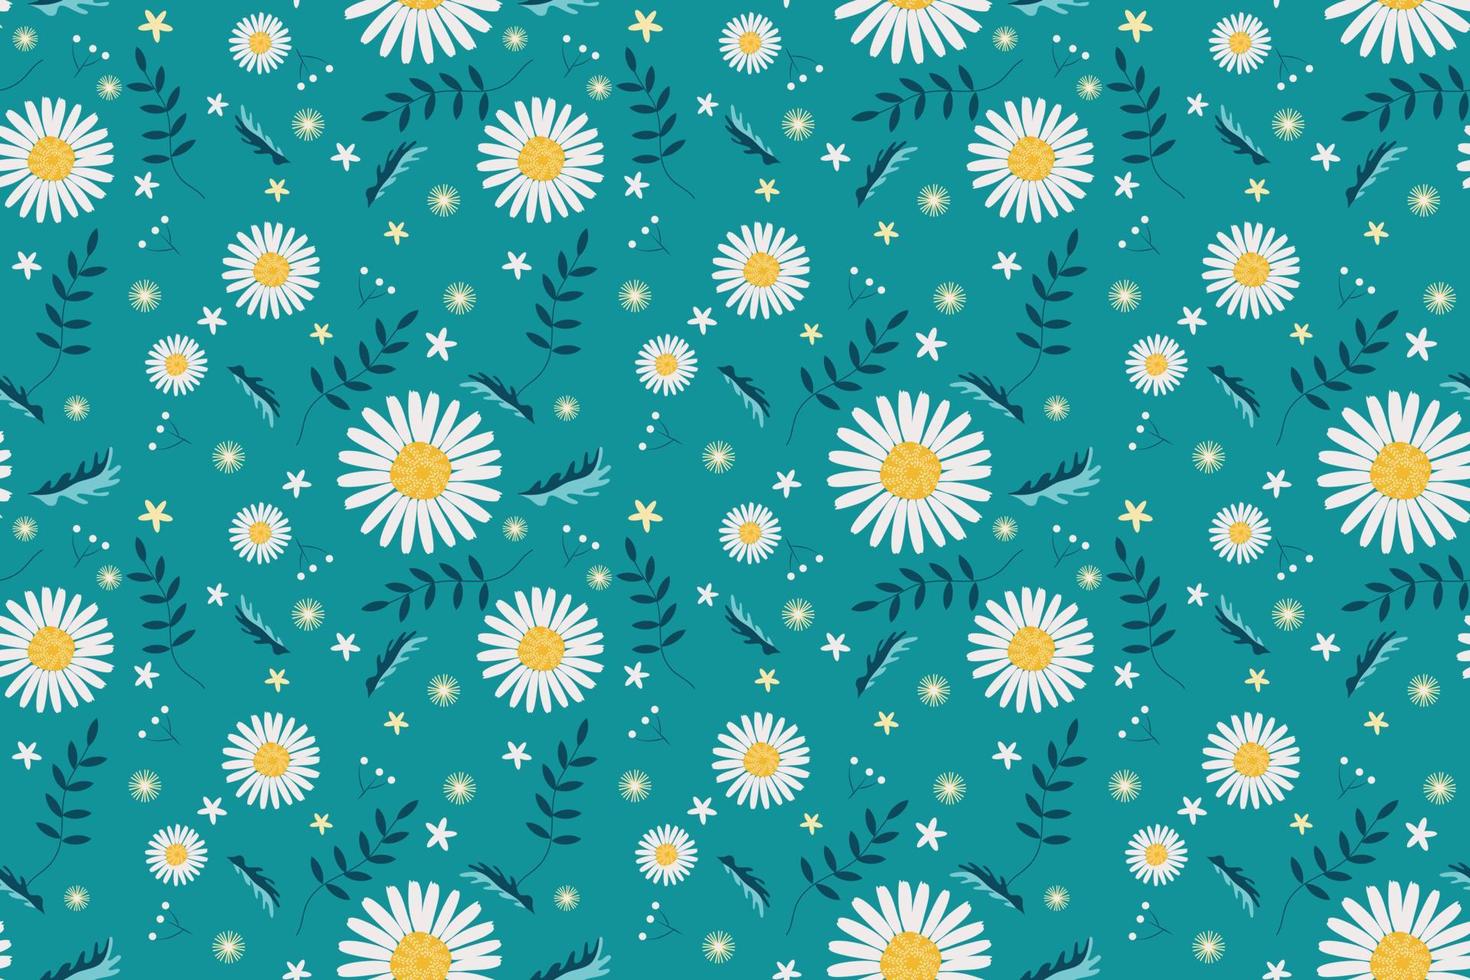 Daisy flower seamless pattern white flower on blue green background with green leaves meadow field design for fashion textile fabric interior wrapping paper etc. vector